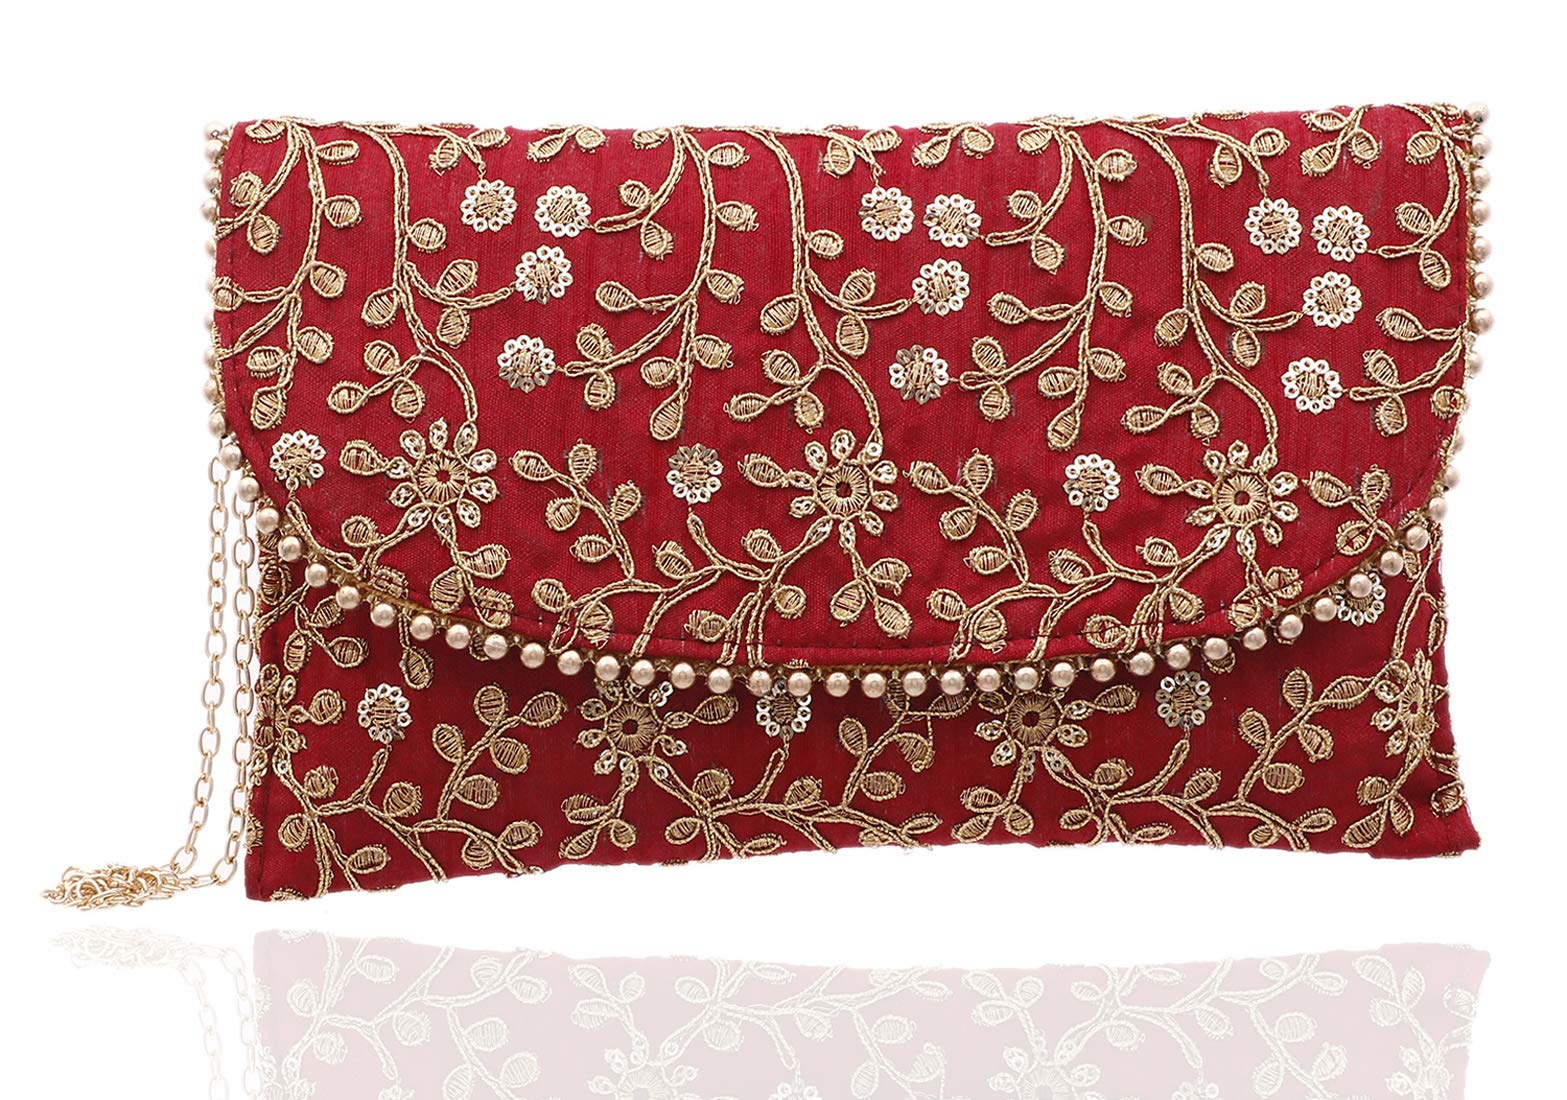 Kuber Industries Handcrafted Embroidered Clutch Bag Purse Handbag for Bridal, Casual, Party, Wedding (Maroon and Peach) - CTKTC034524-2 Pieces